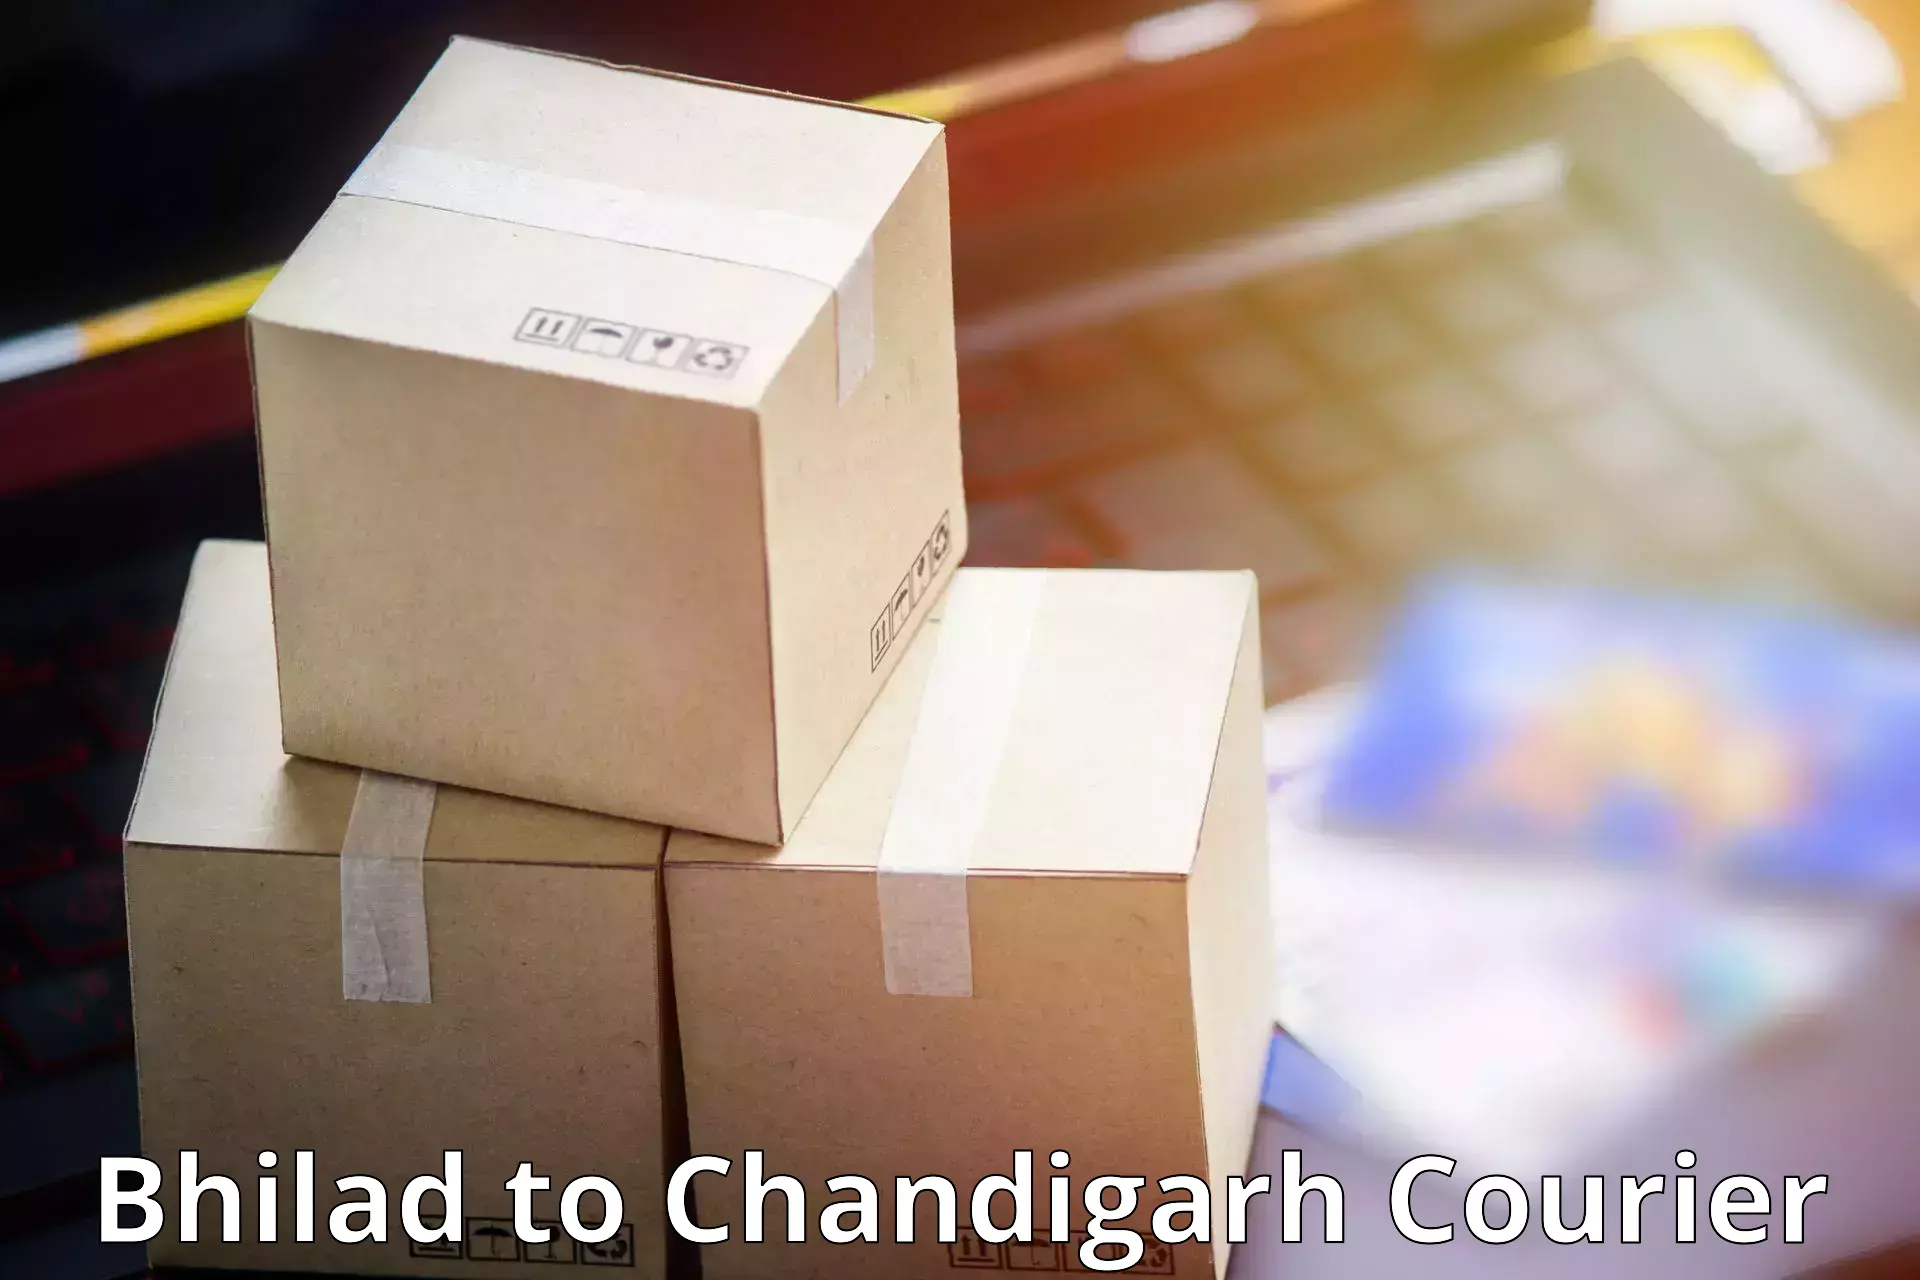 Parcel delivery automation Bhilad to Chandigarh